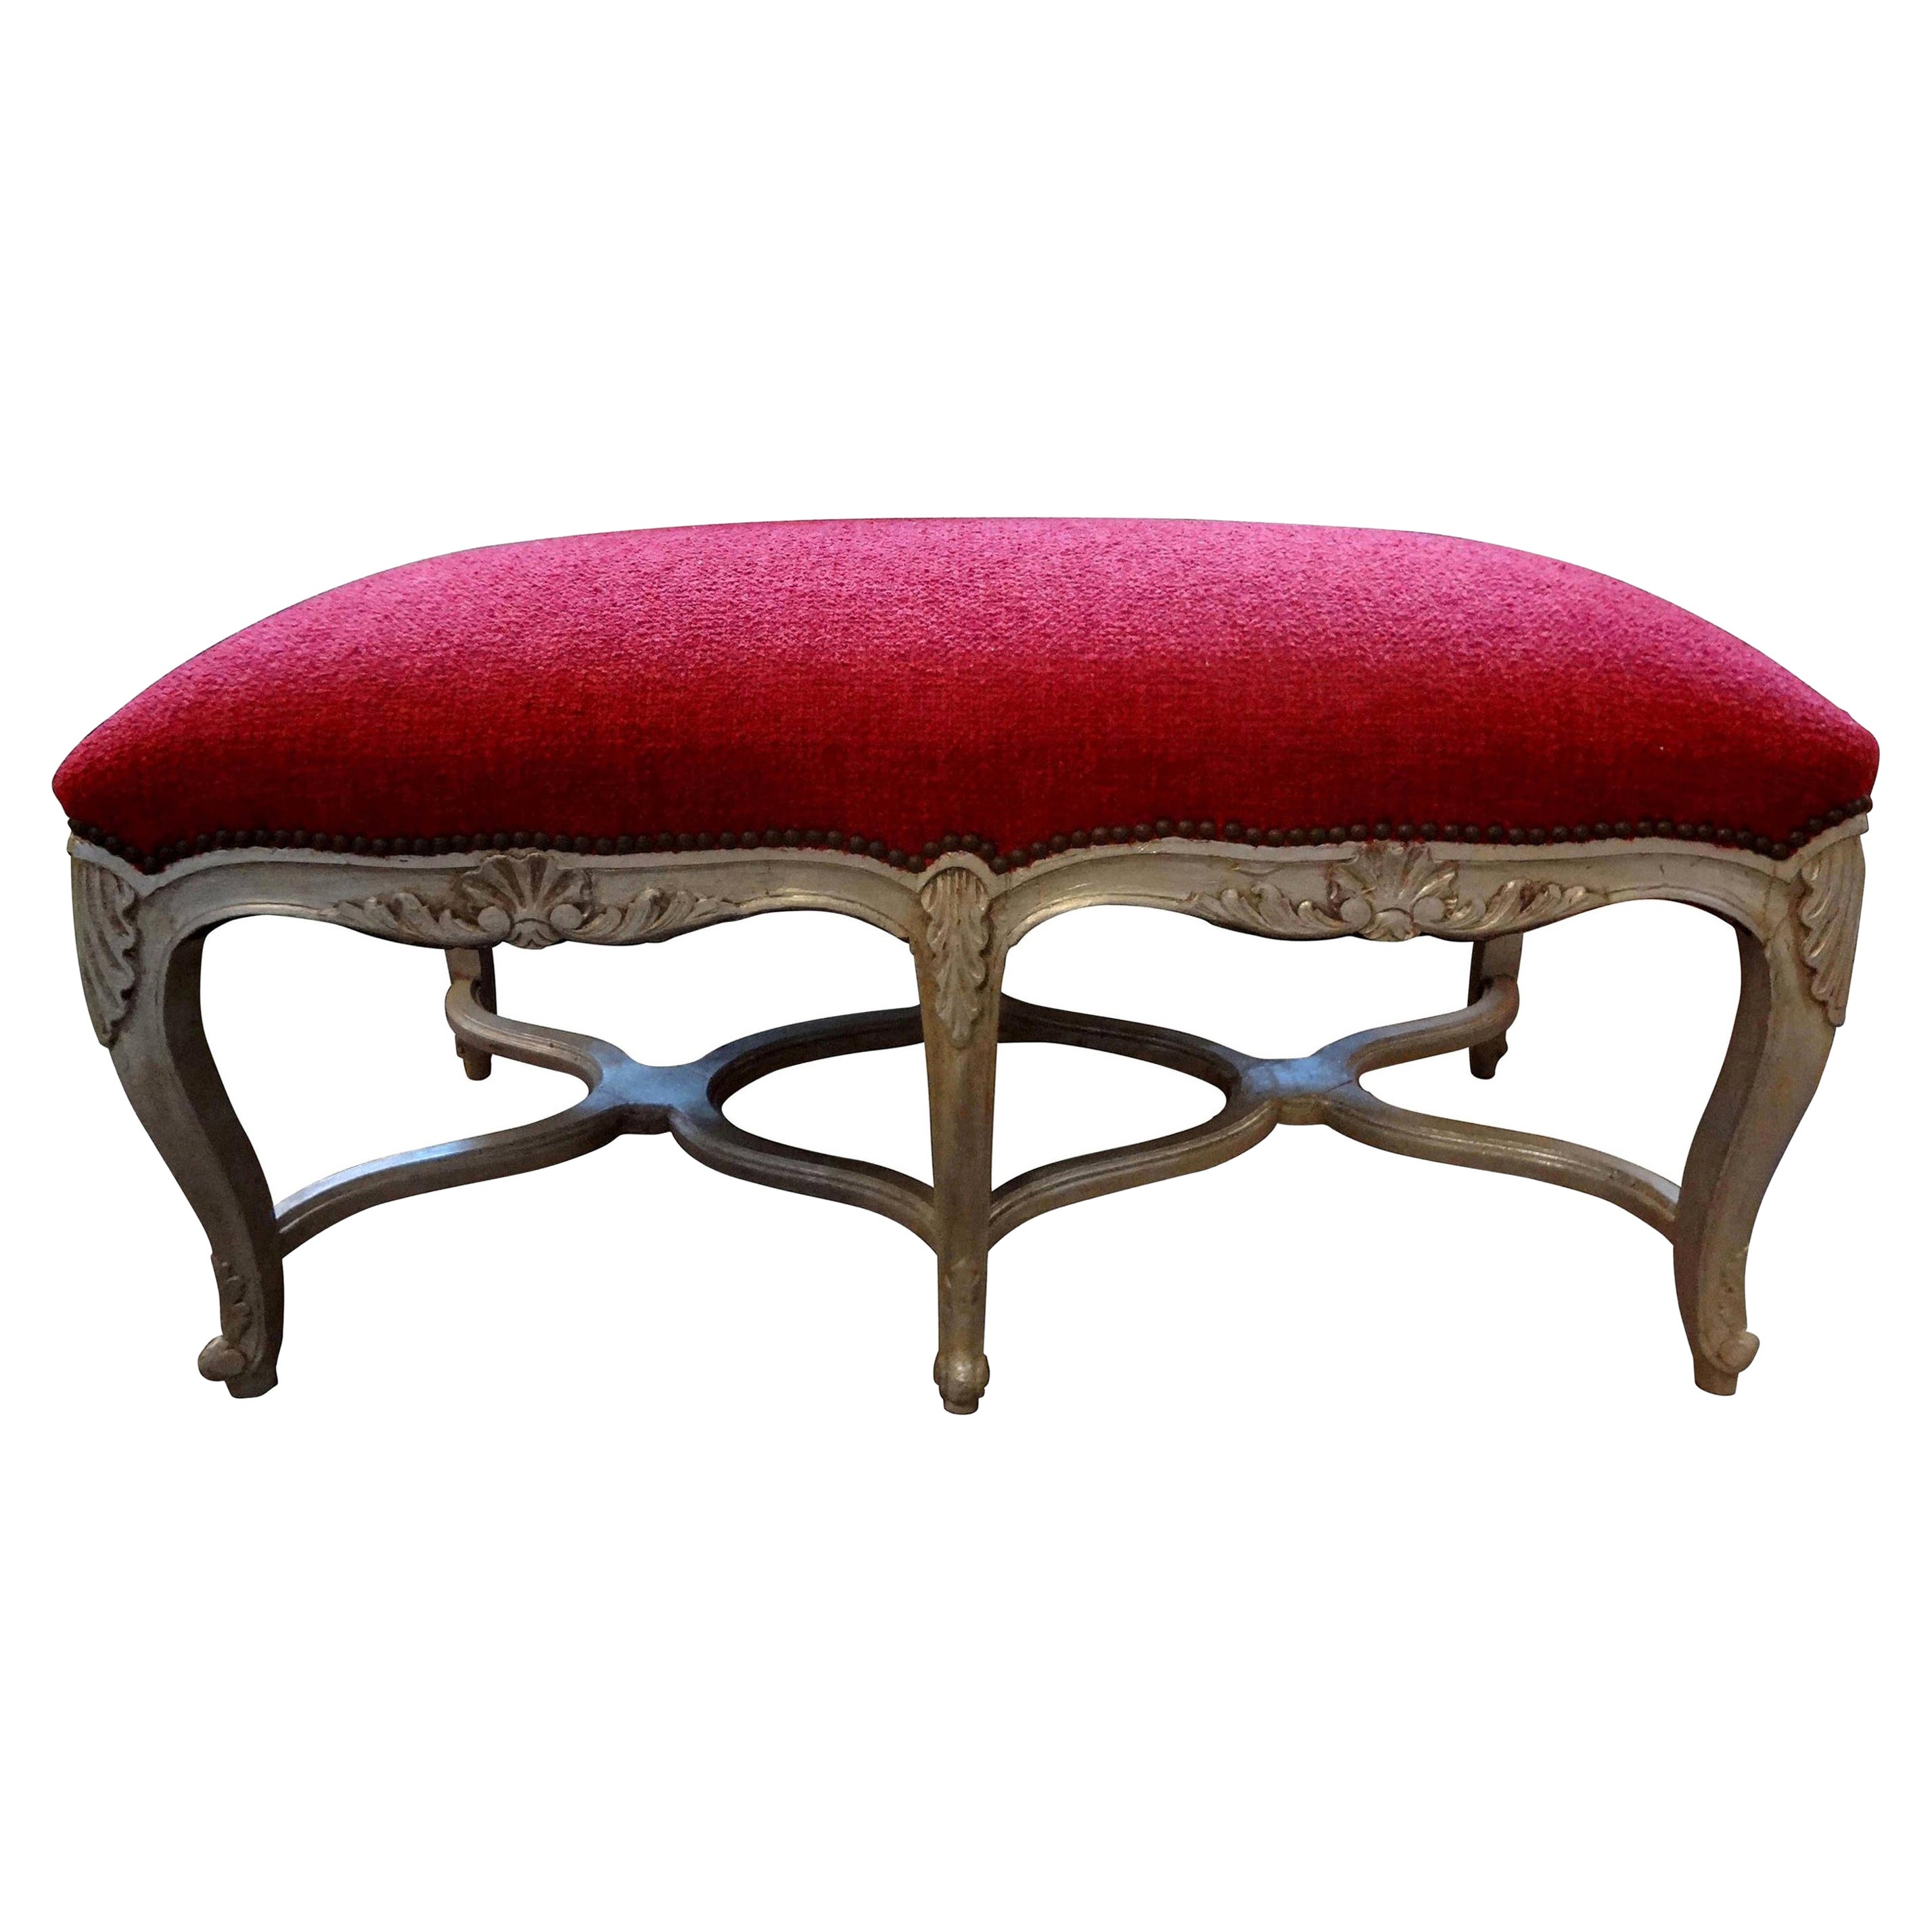 19th Century French Louis XV Style Silver Gilt Bench